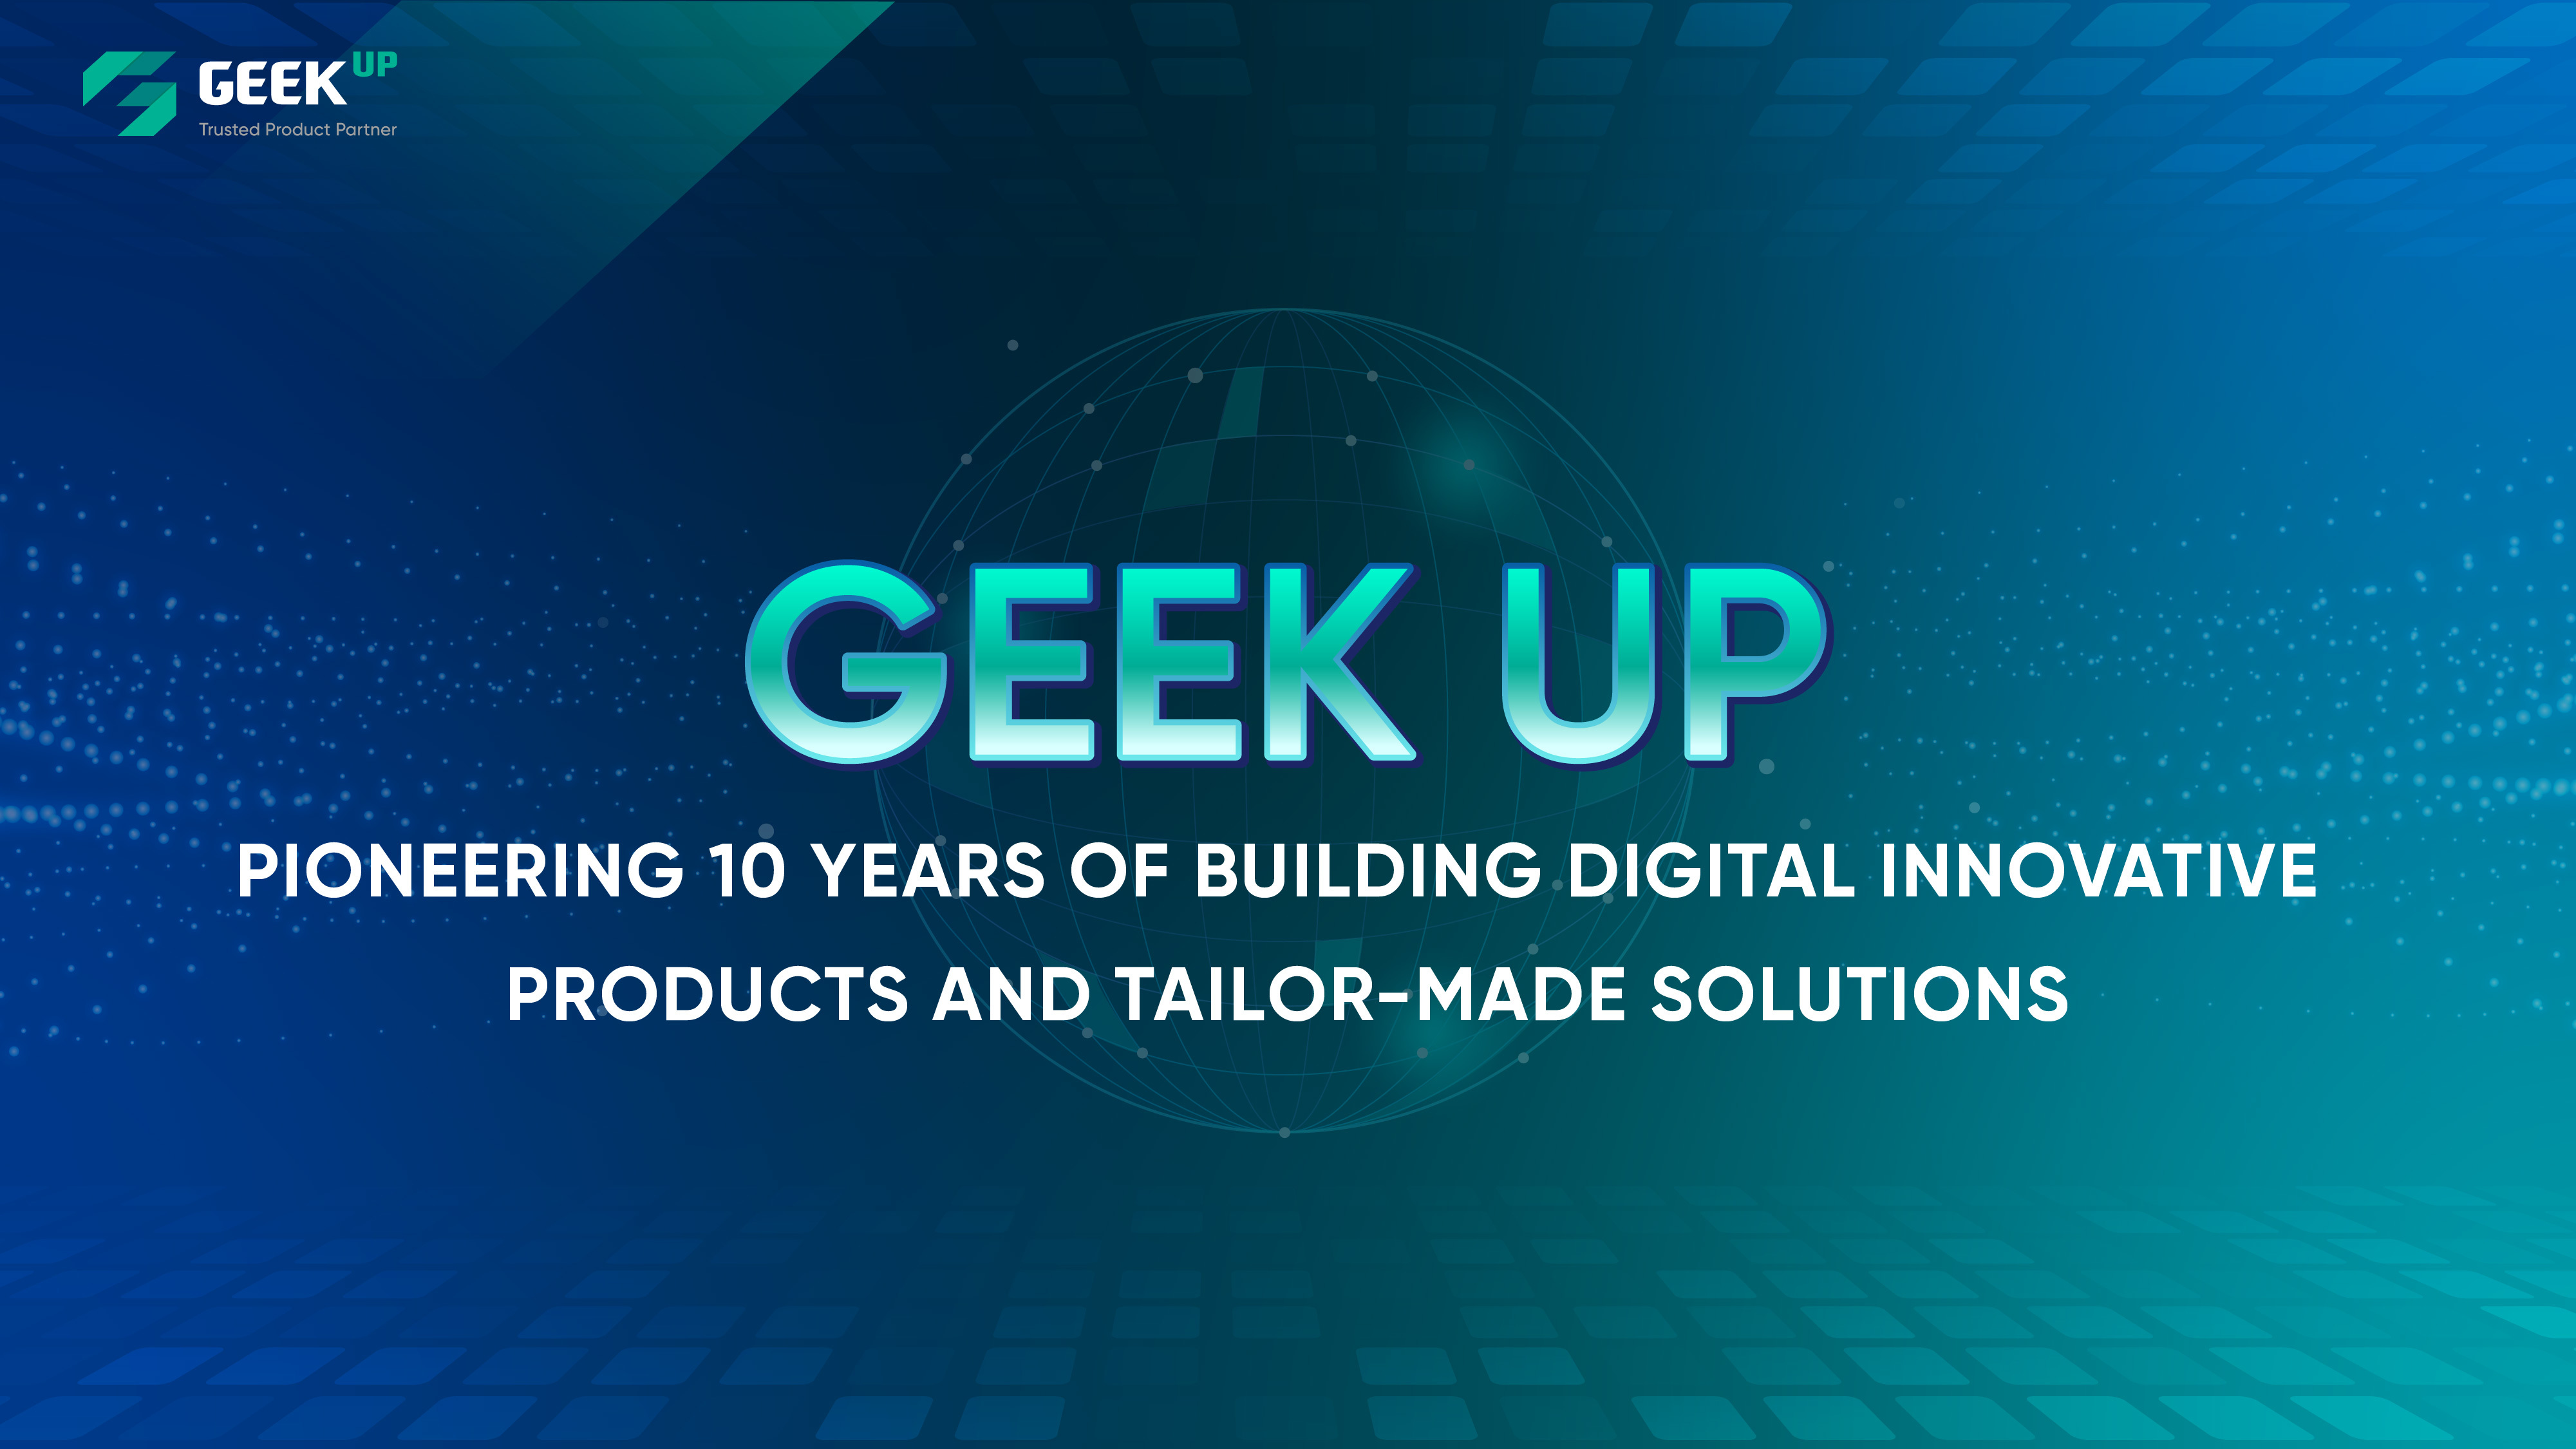 Pioneering 10 years of building digital innovative products and tailor-made solutions